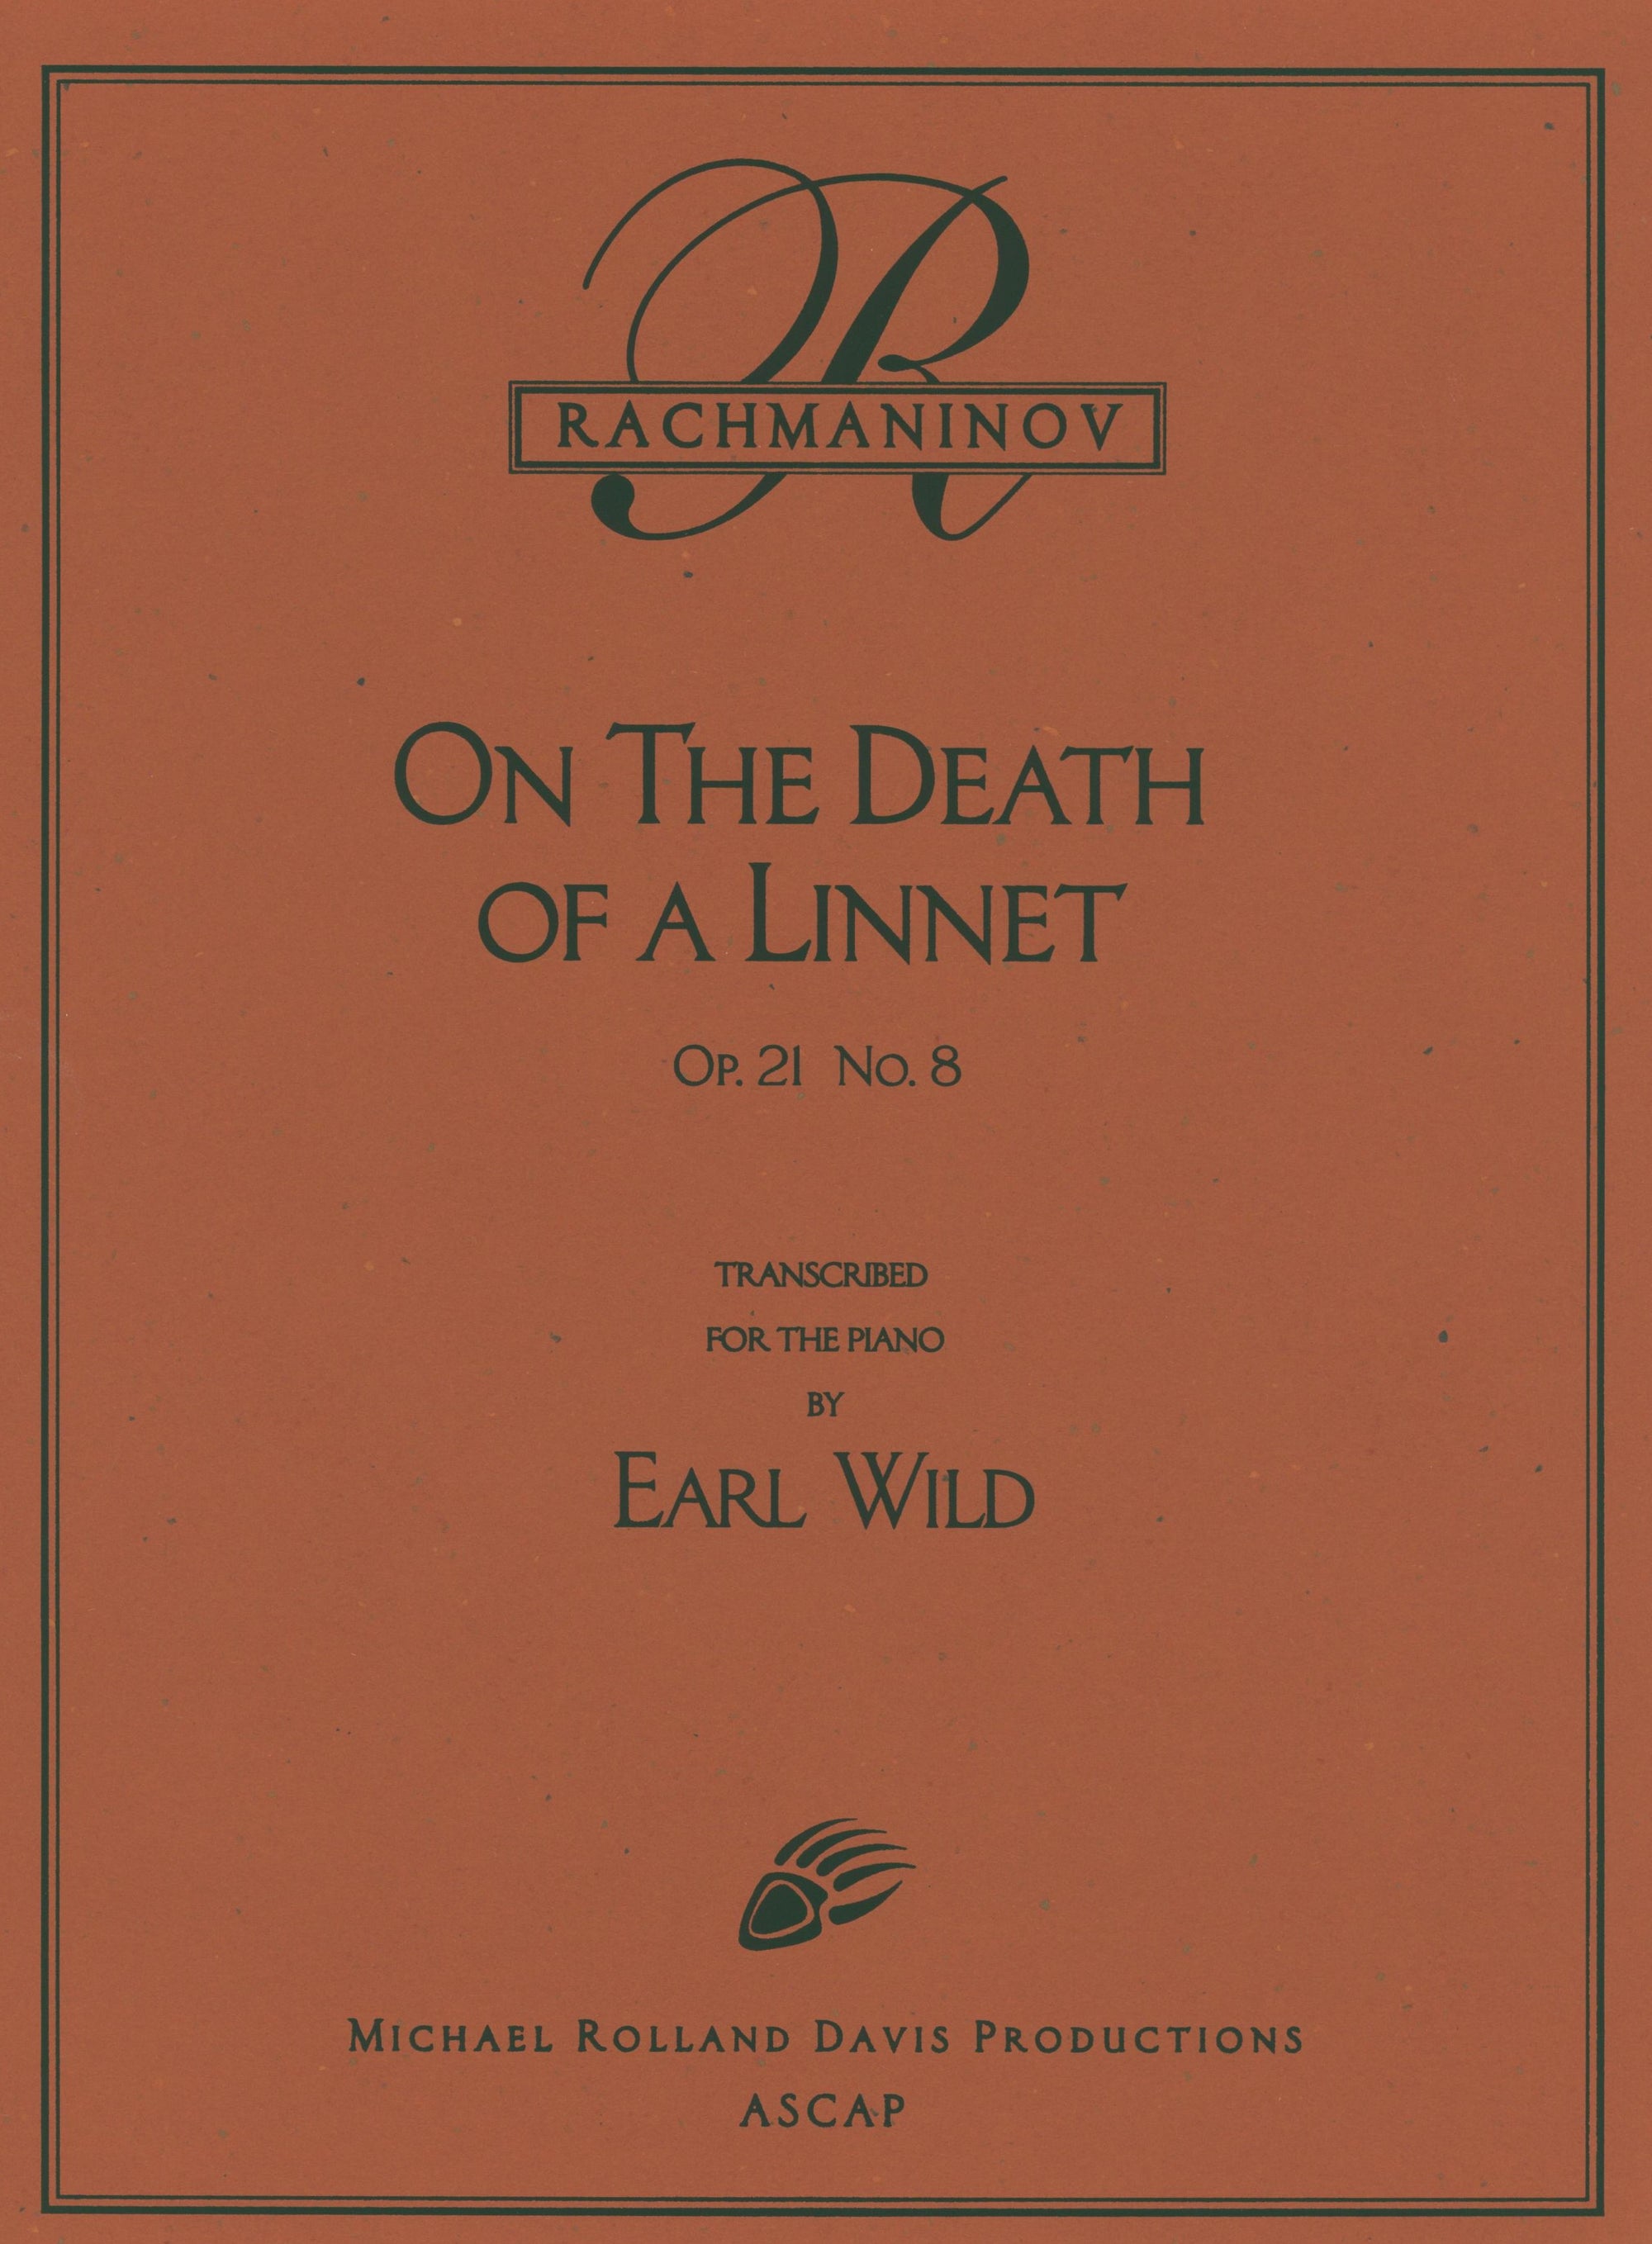 Rachmaninoff-Wild: On the Death of a Linnet, Op. 21, No. 8